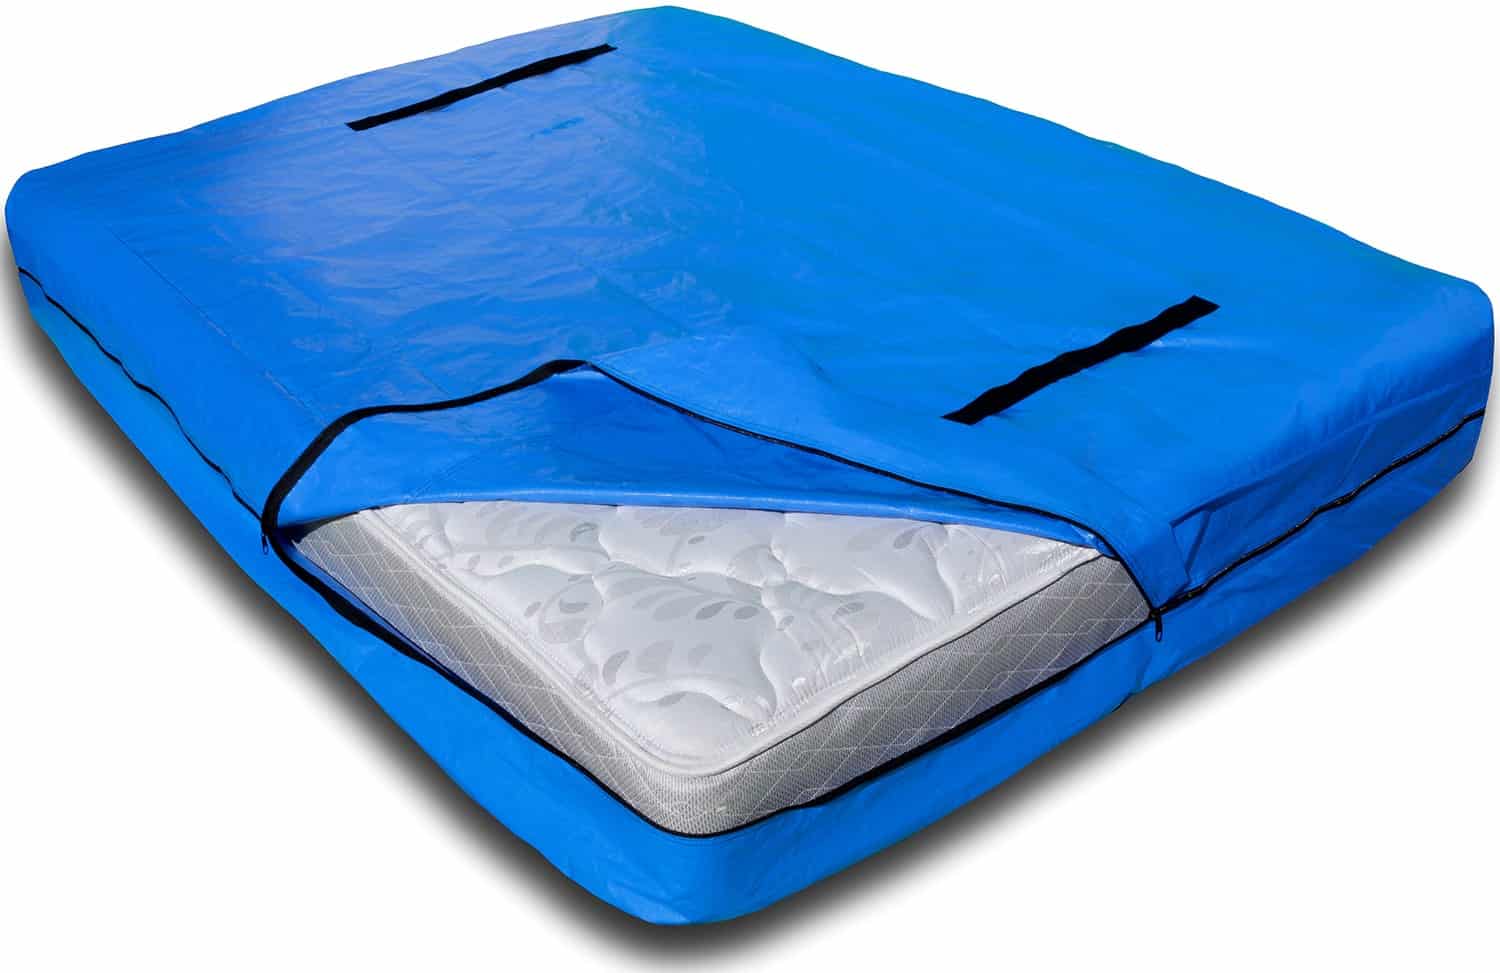 Levarark Mattress Bag For Moving And StorageCal King Double CoverHeavy Dut 